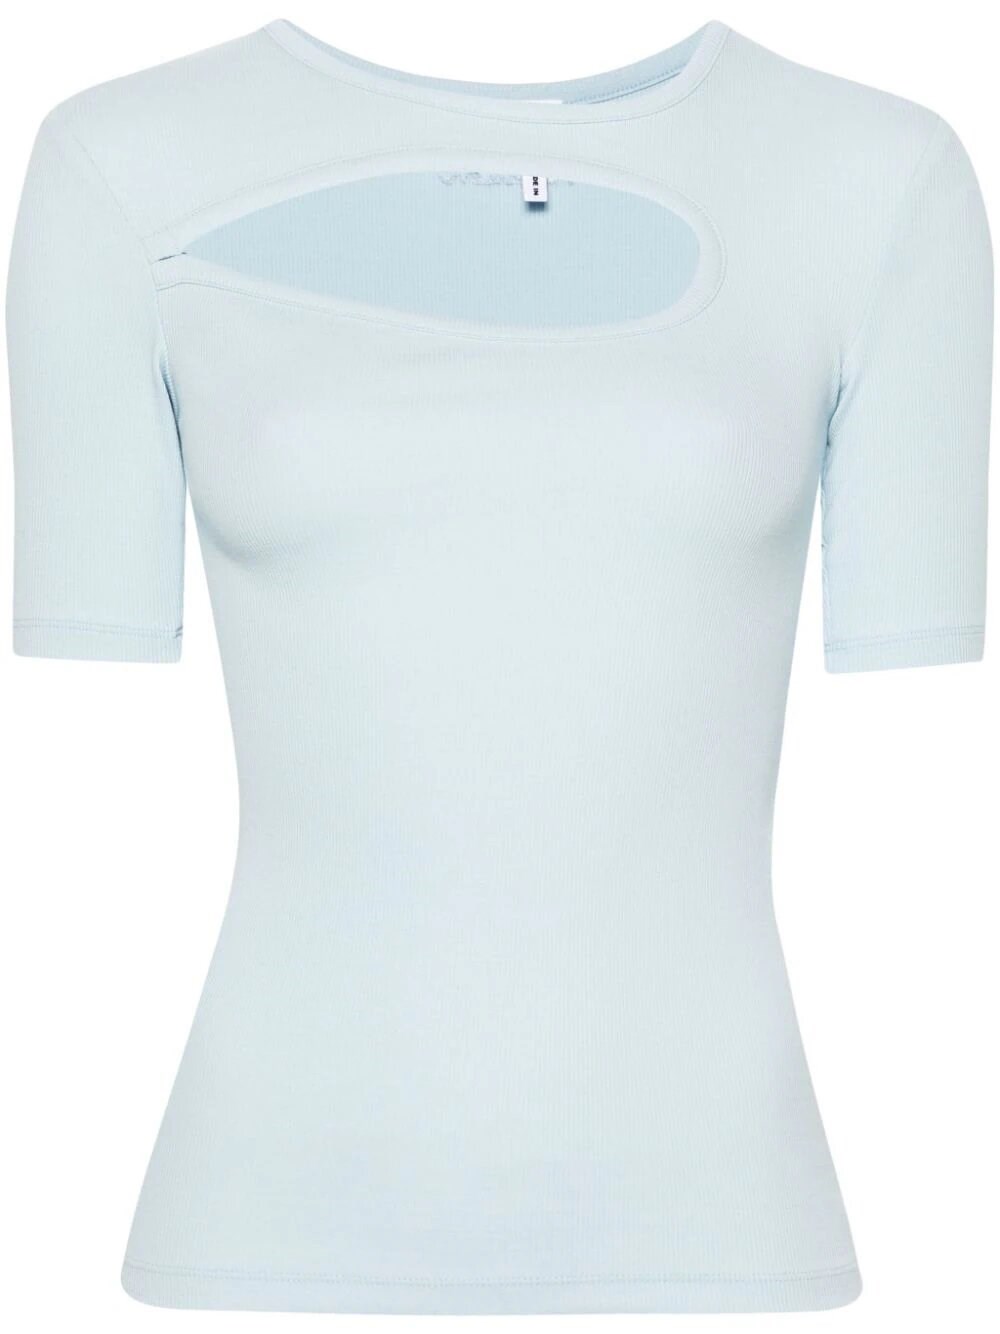 Remain Rib Cut Out T-shirt In Light Blue